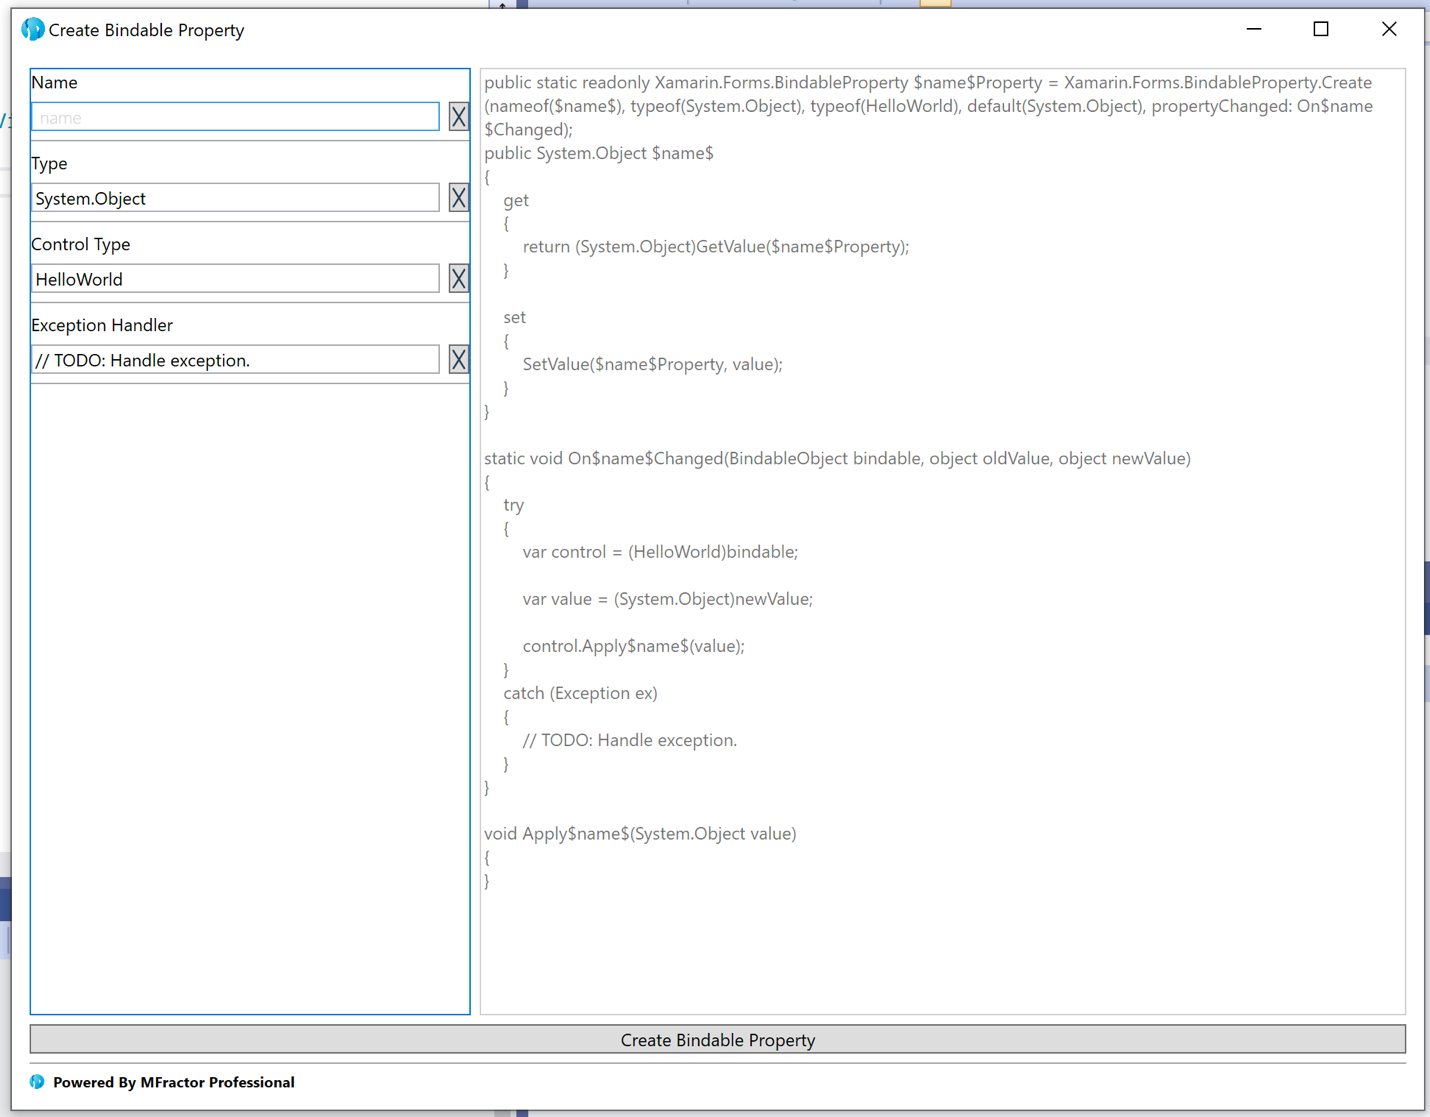 Using MFractors bindable property wizard to create a new Xamarin.Forms bindable property